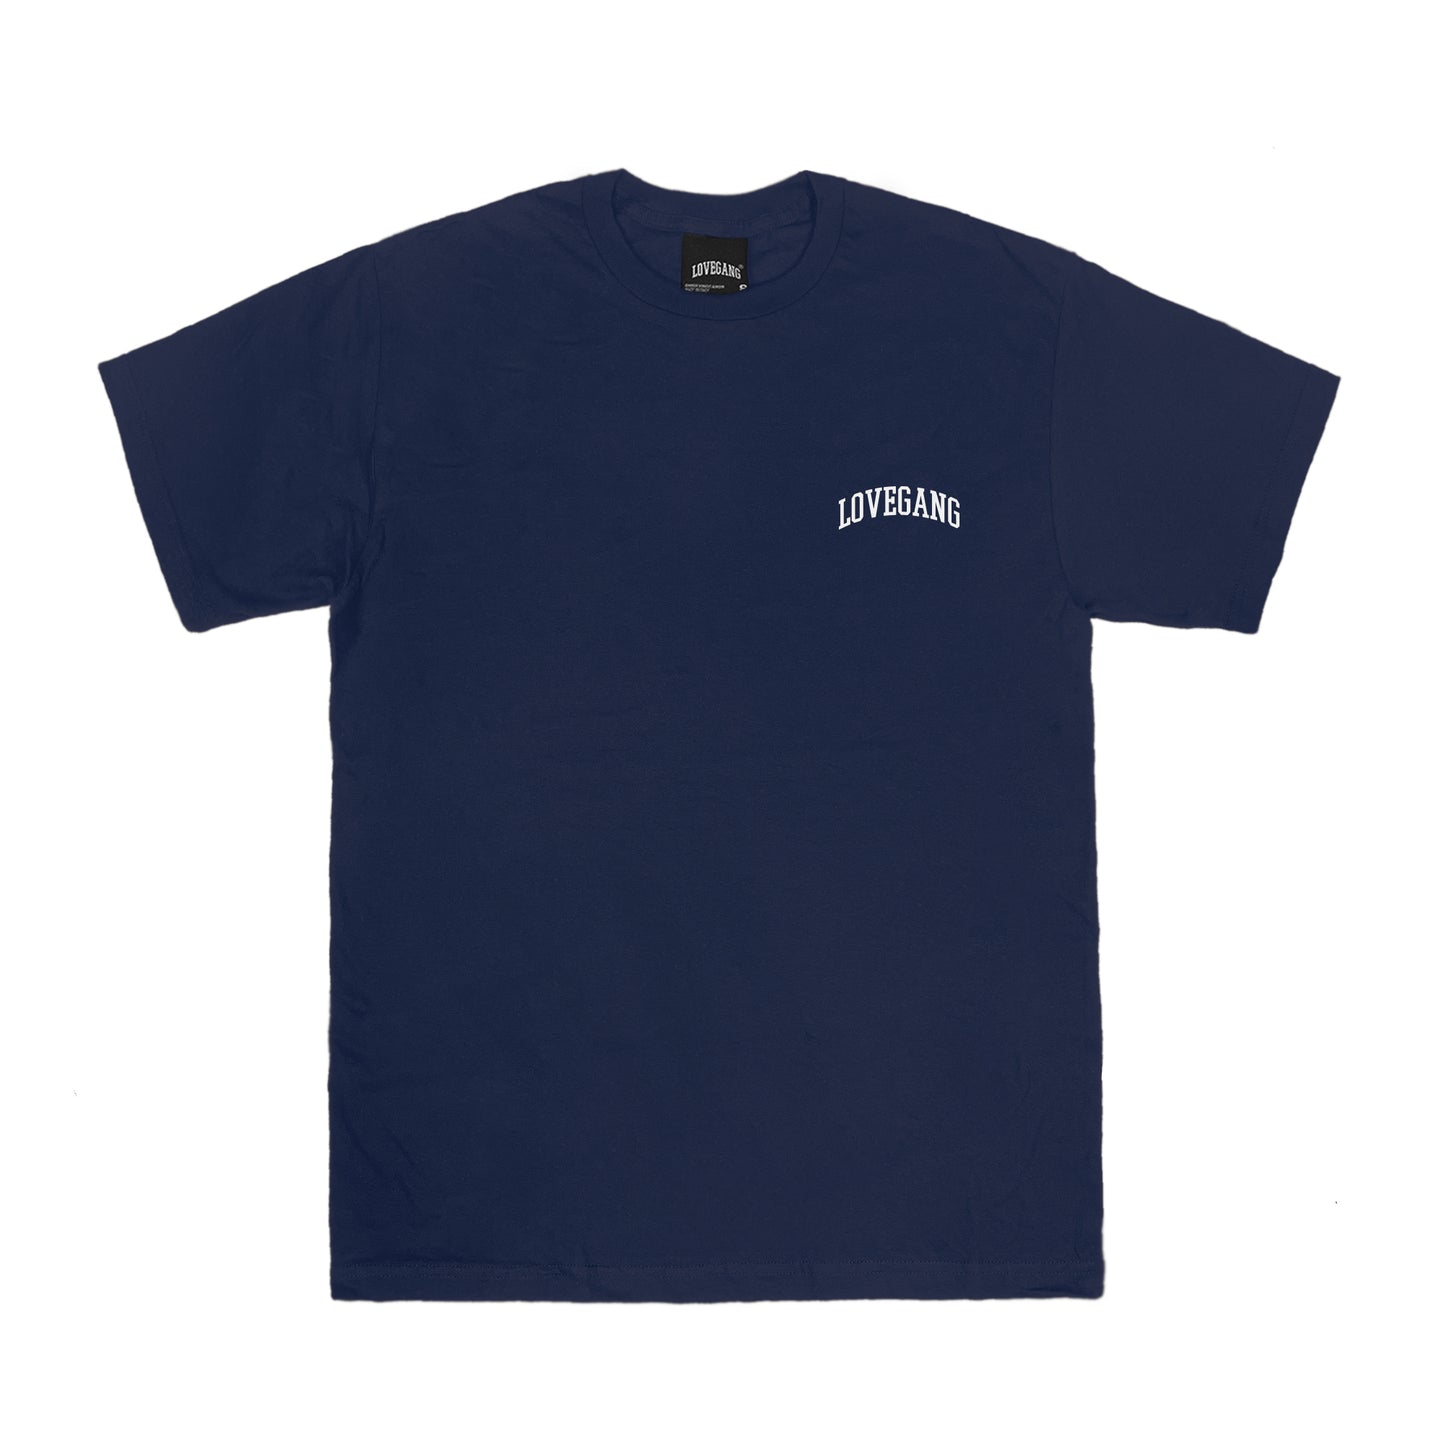 COLLEGE S/S '22 - T-SHIRT (NV)